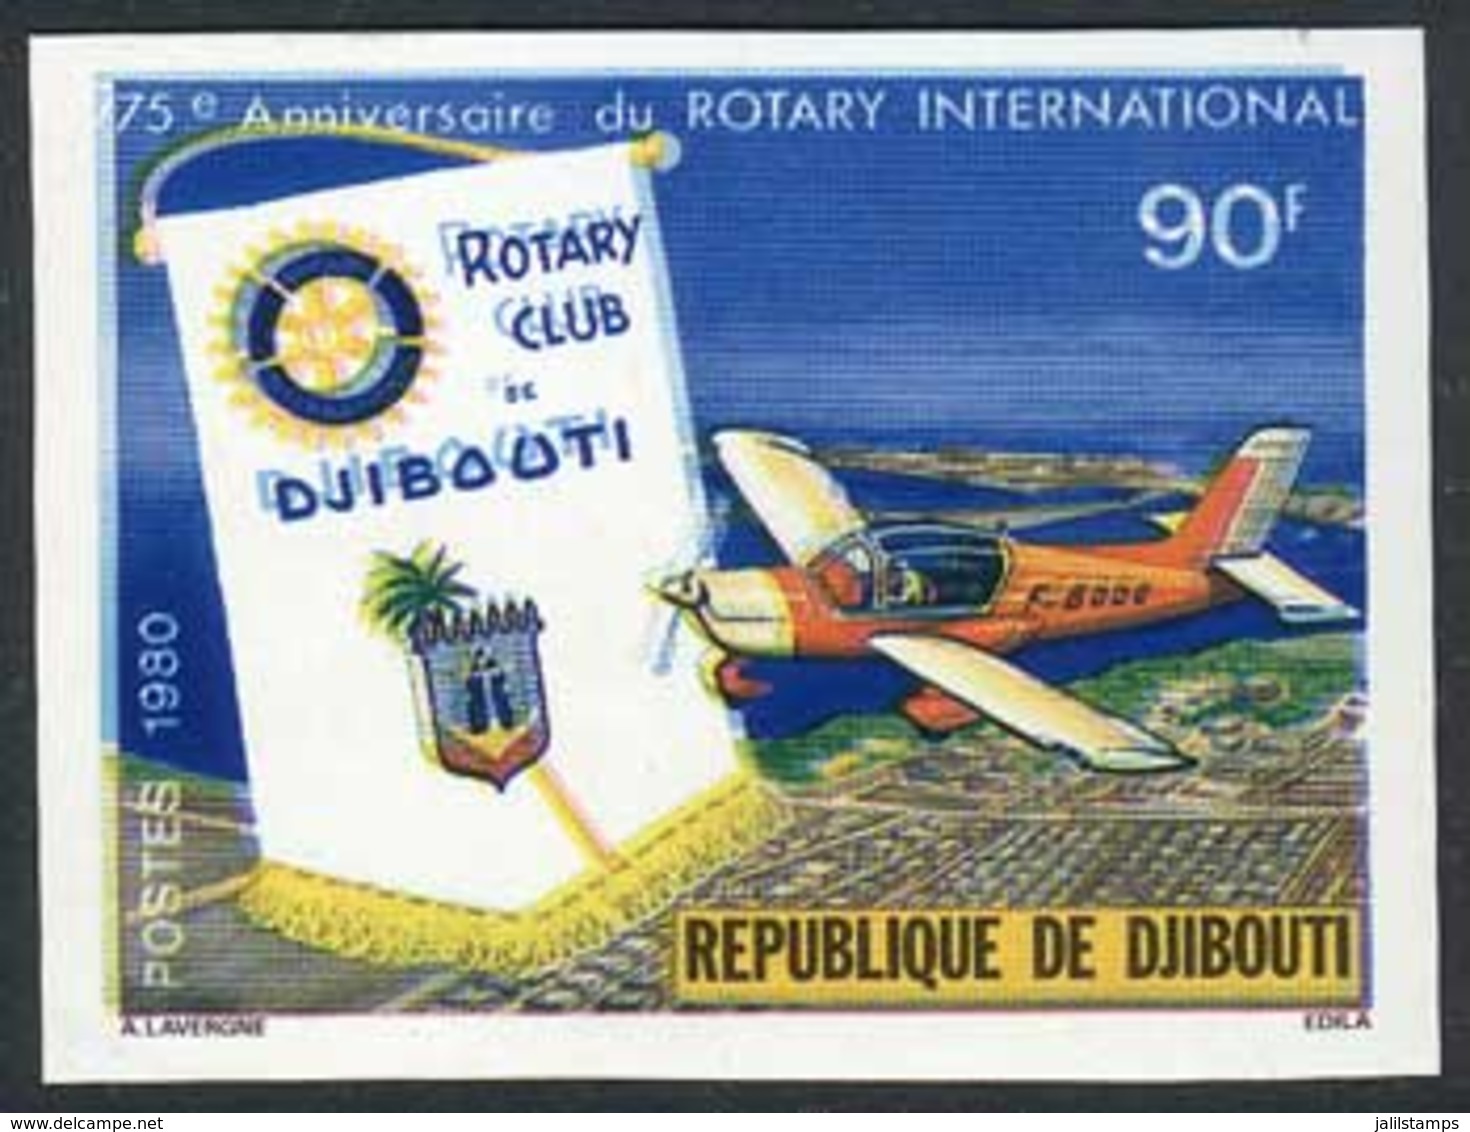 DJIBOUTI: Sc.509, 1980 Rotary International, With IMPERFORATE And DOUBLE IMPRESSION Of Blue Color Varieties, VF Quality! - Djibouti (1977-...)